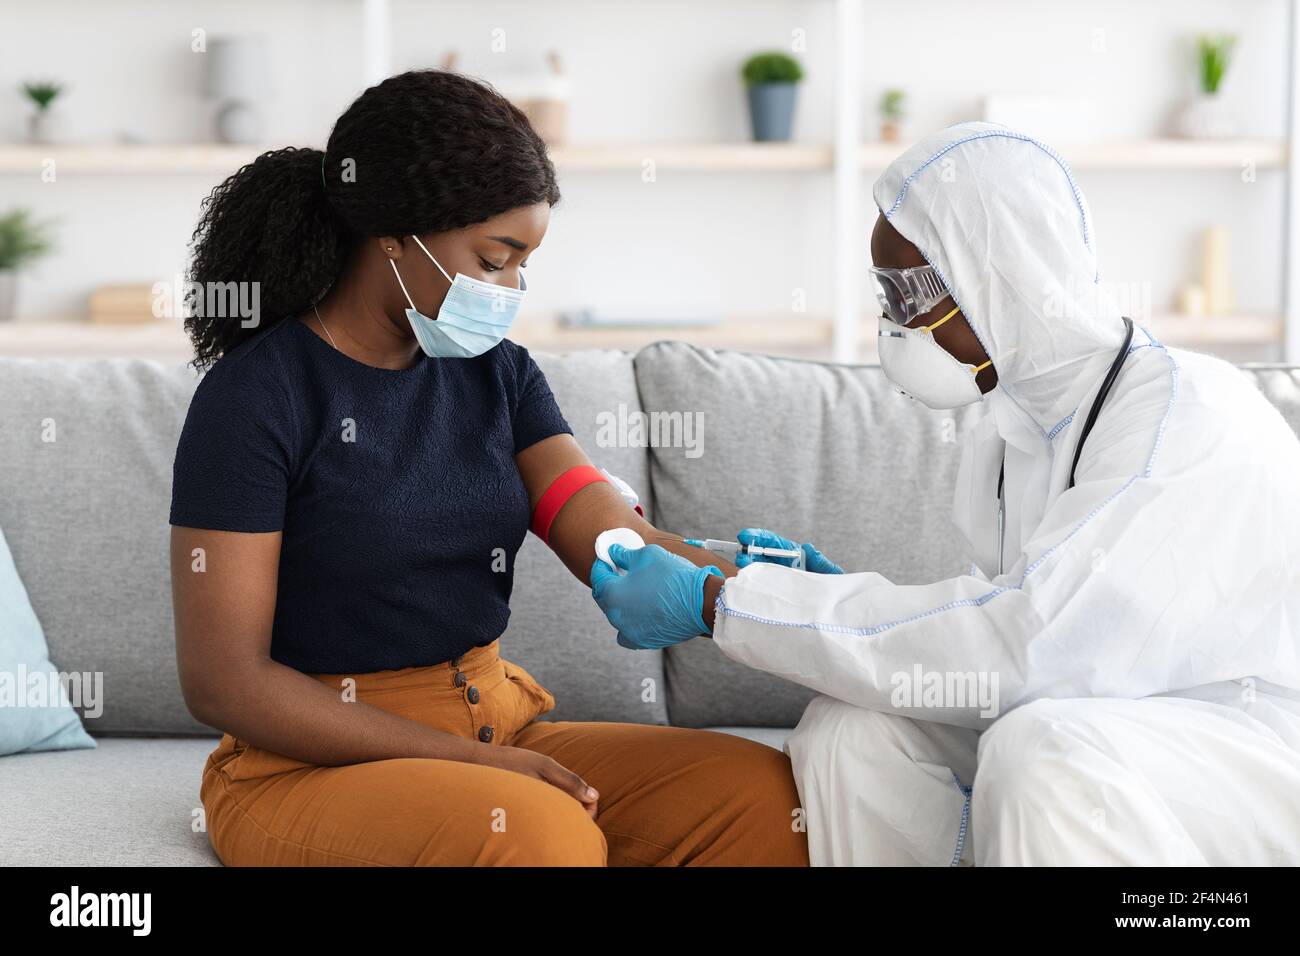 Doctor in protective suit taking blood sample for female patient Stock Photo